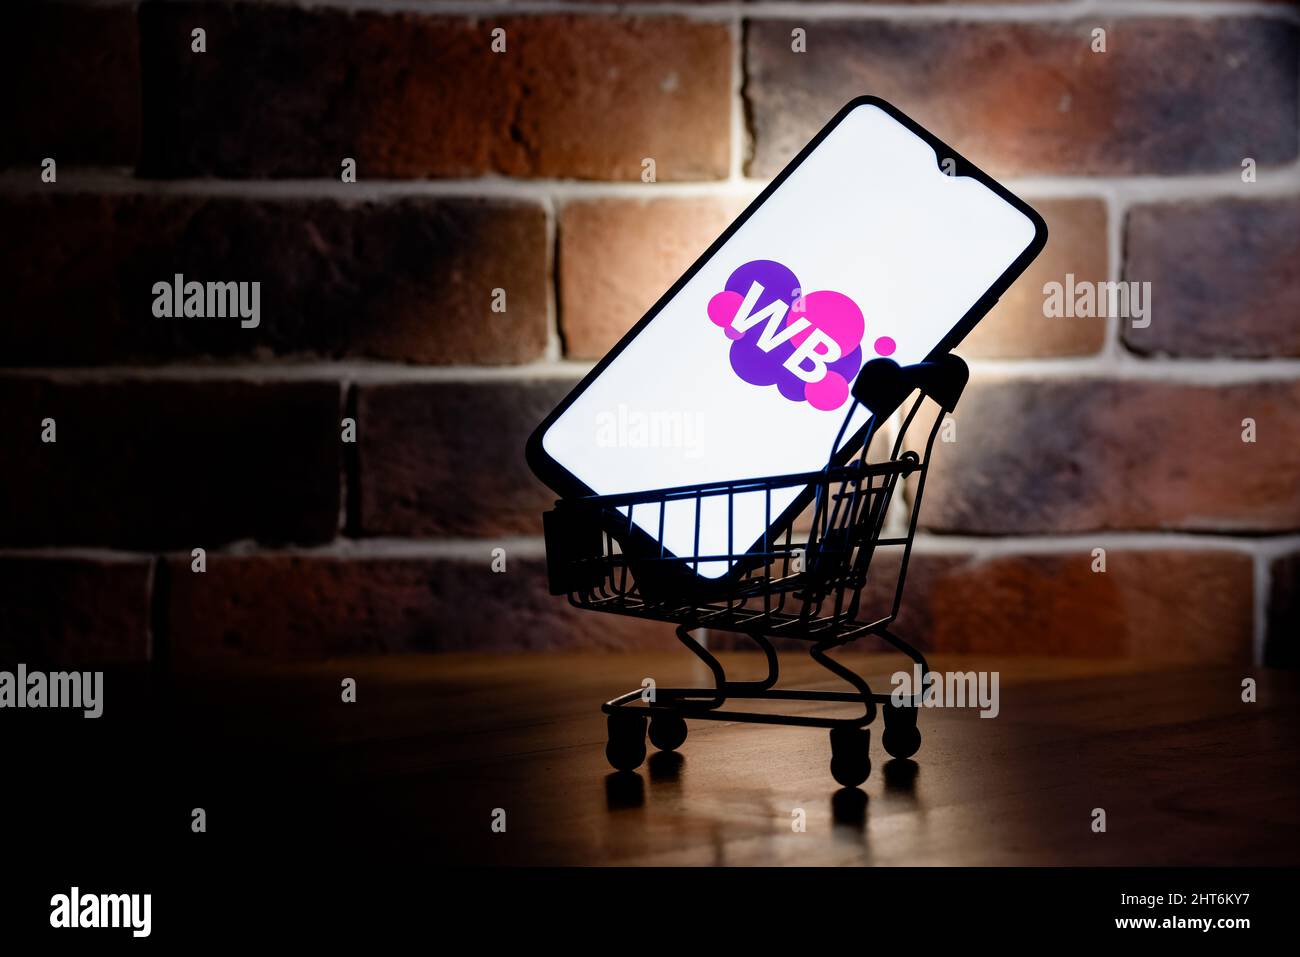 Wildberries is one of largest Russian online retailer. Smartphone with Wildberries logo on screen in the shopping cart. Stock Photo